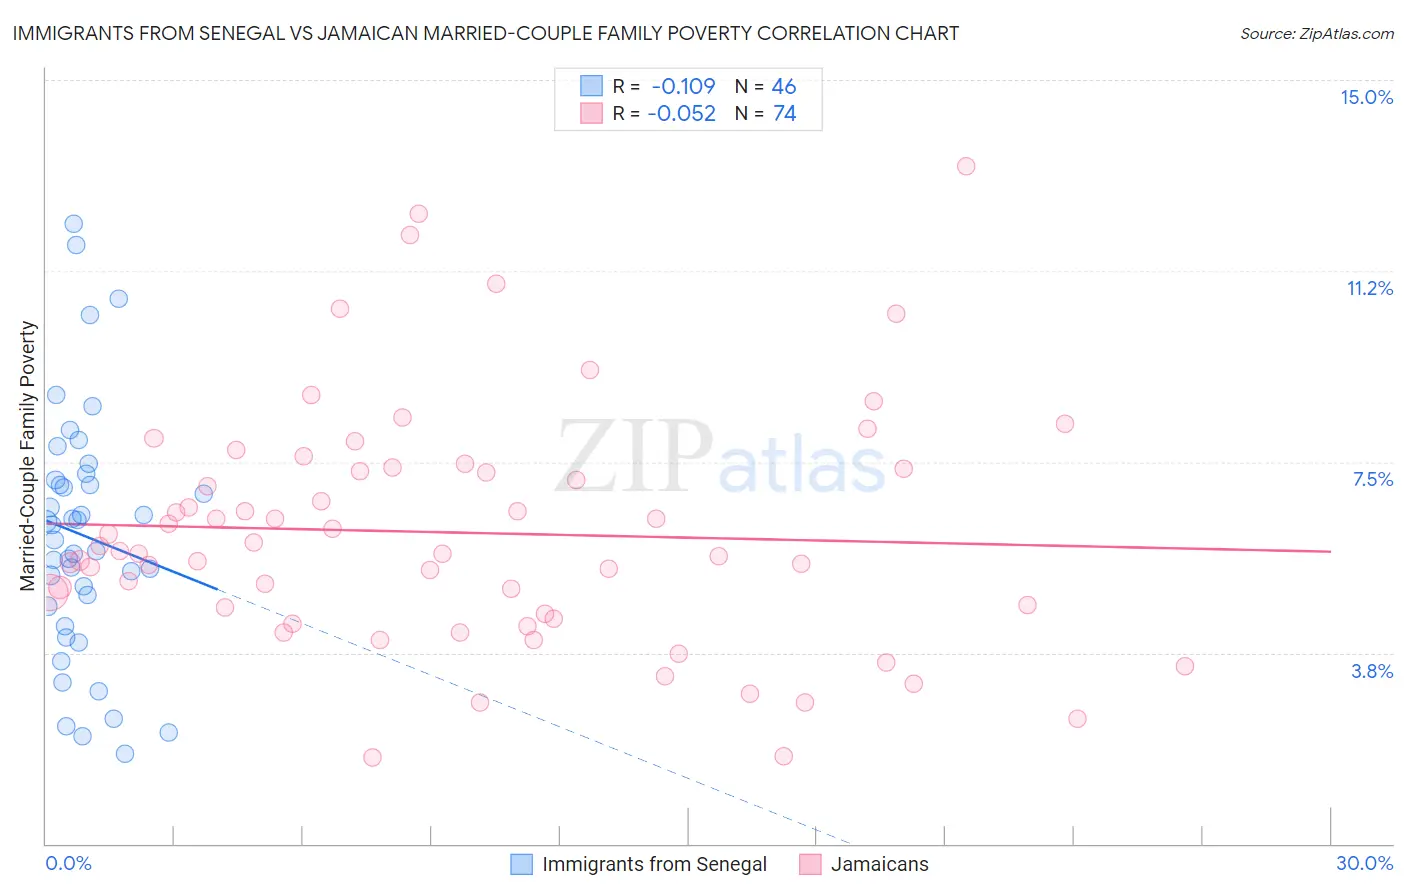 Immigrants from Senegal vs Jamaican Married-Couple Family Poverty